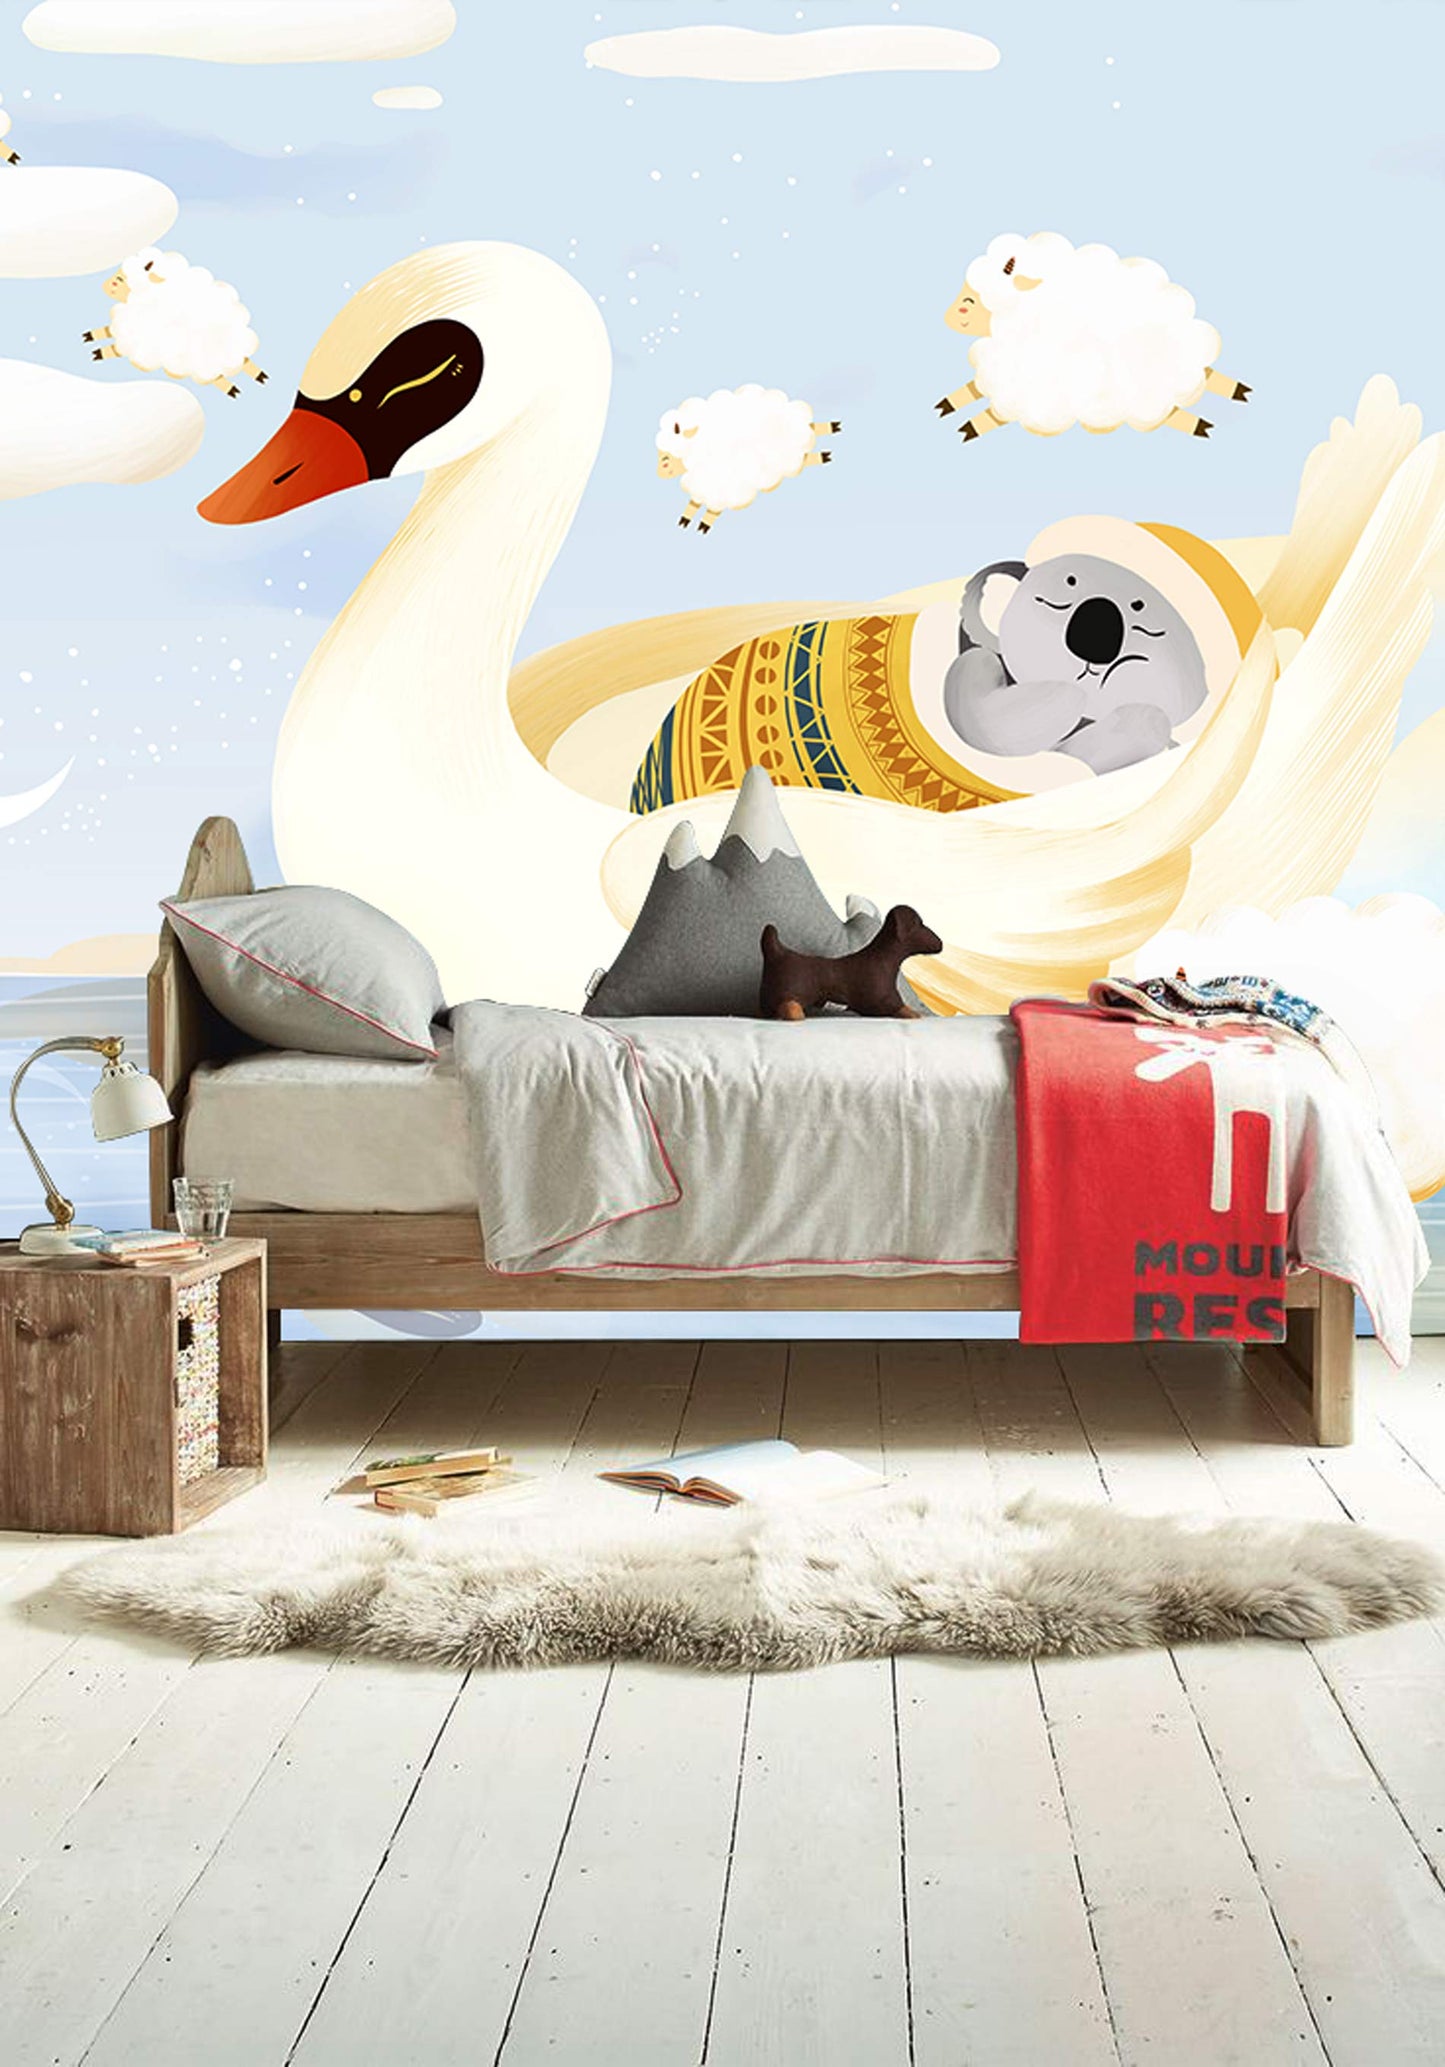 Decorate your child's bedroom with this adorable Fall Asleep Animal Wallpaper Mural.